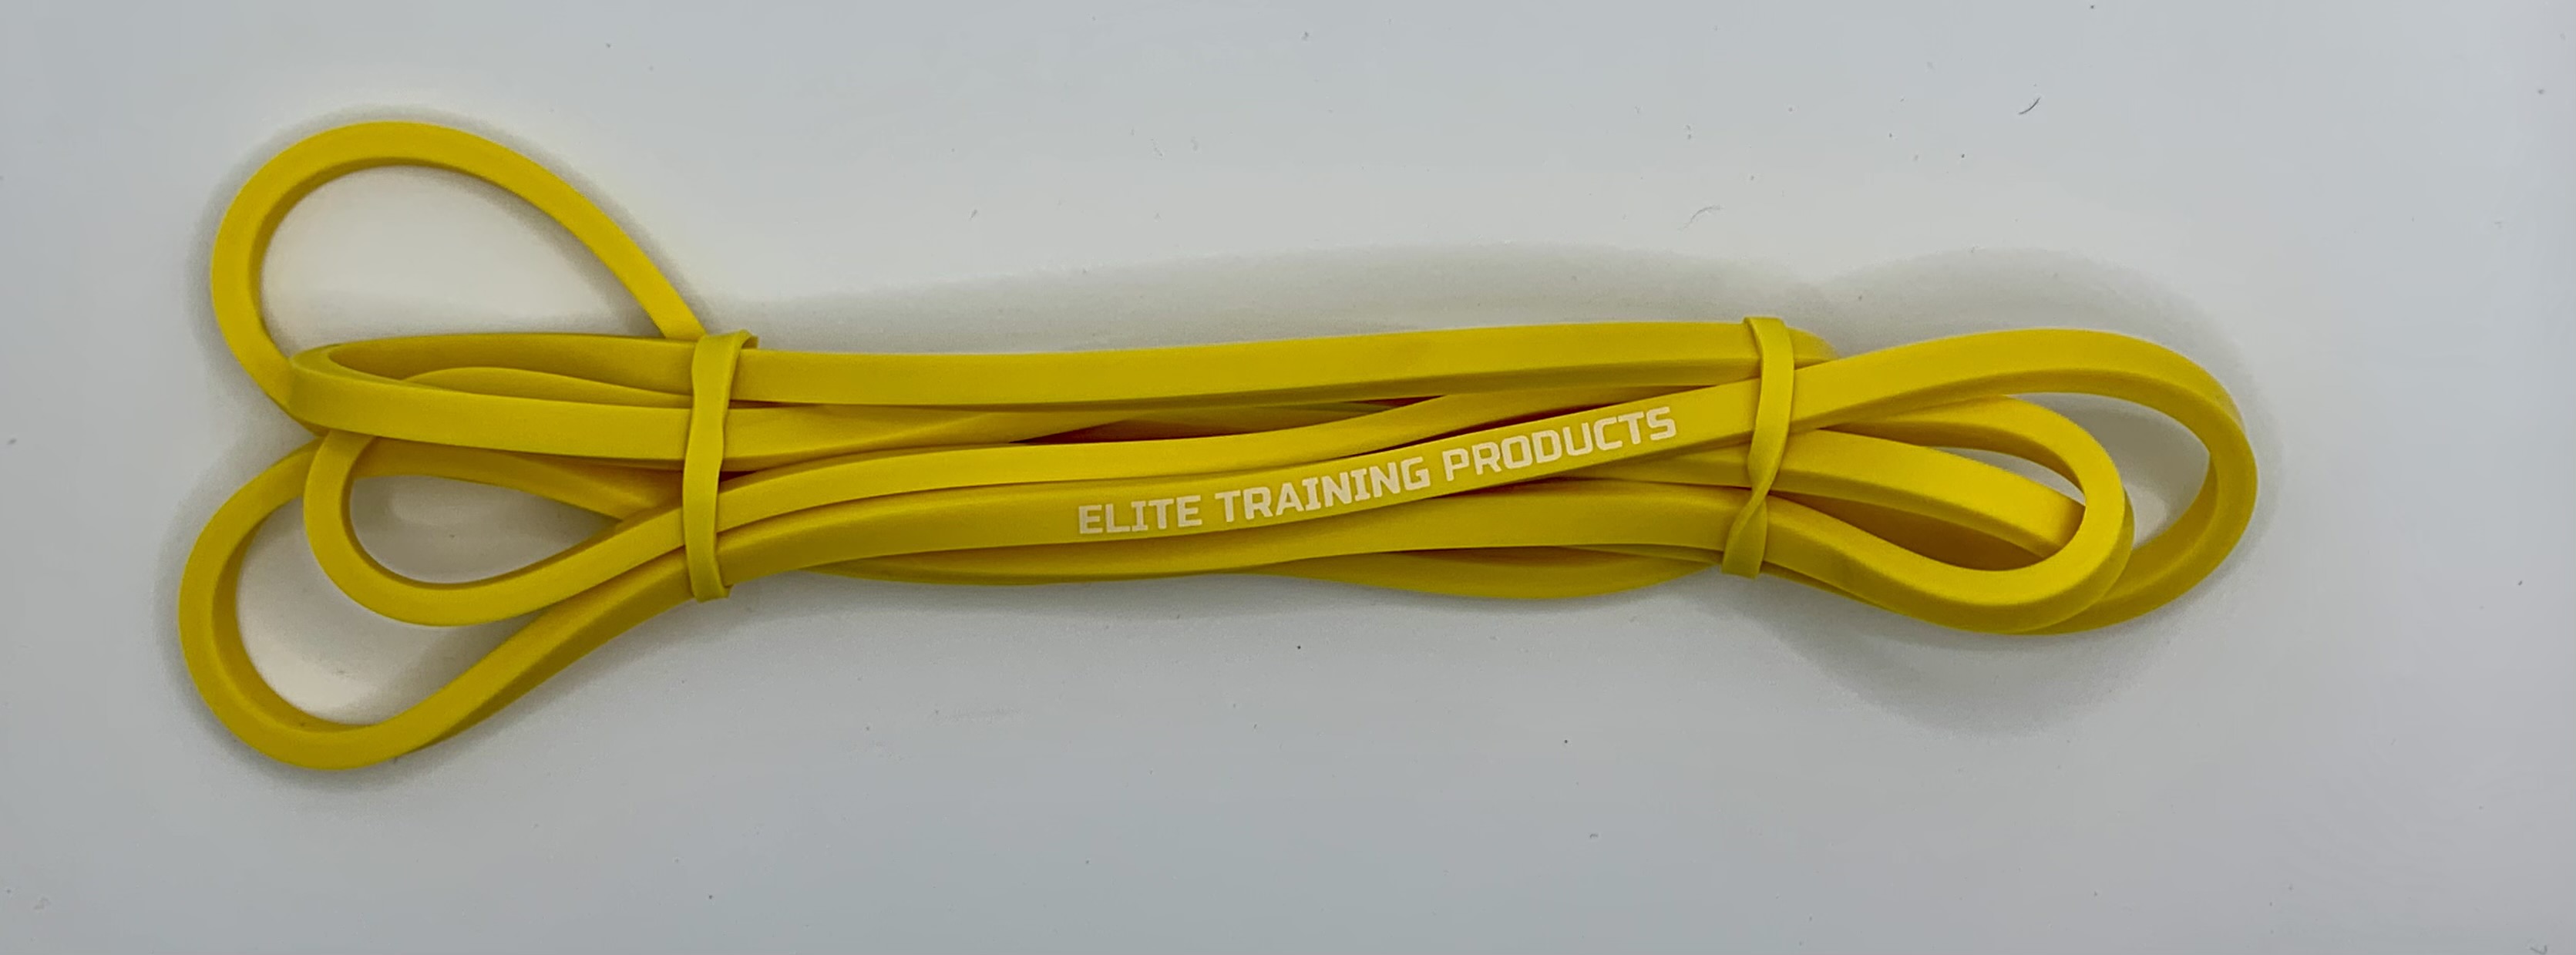 Extra light latex resistance bands